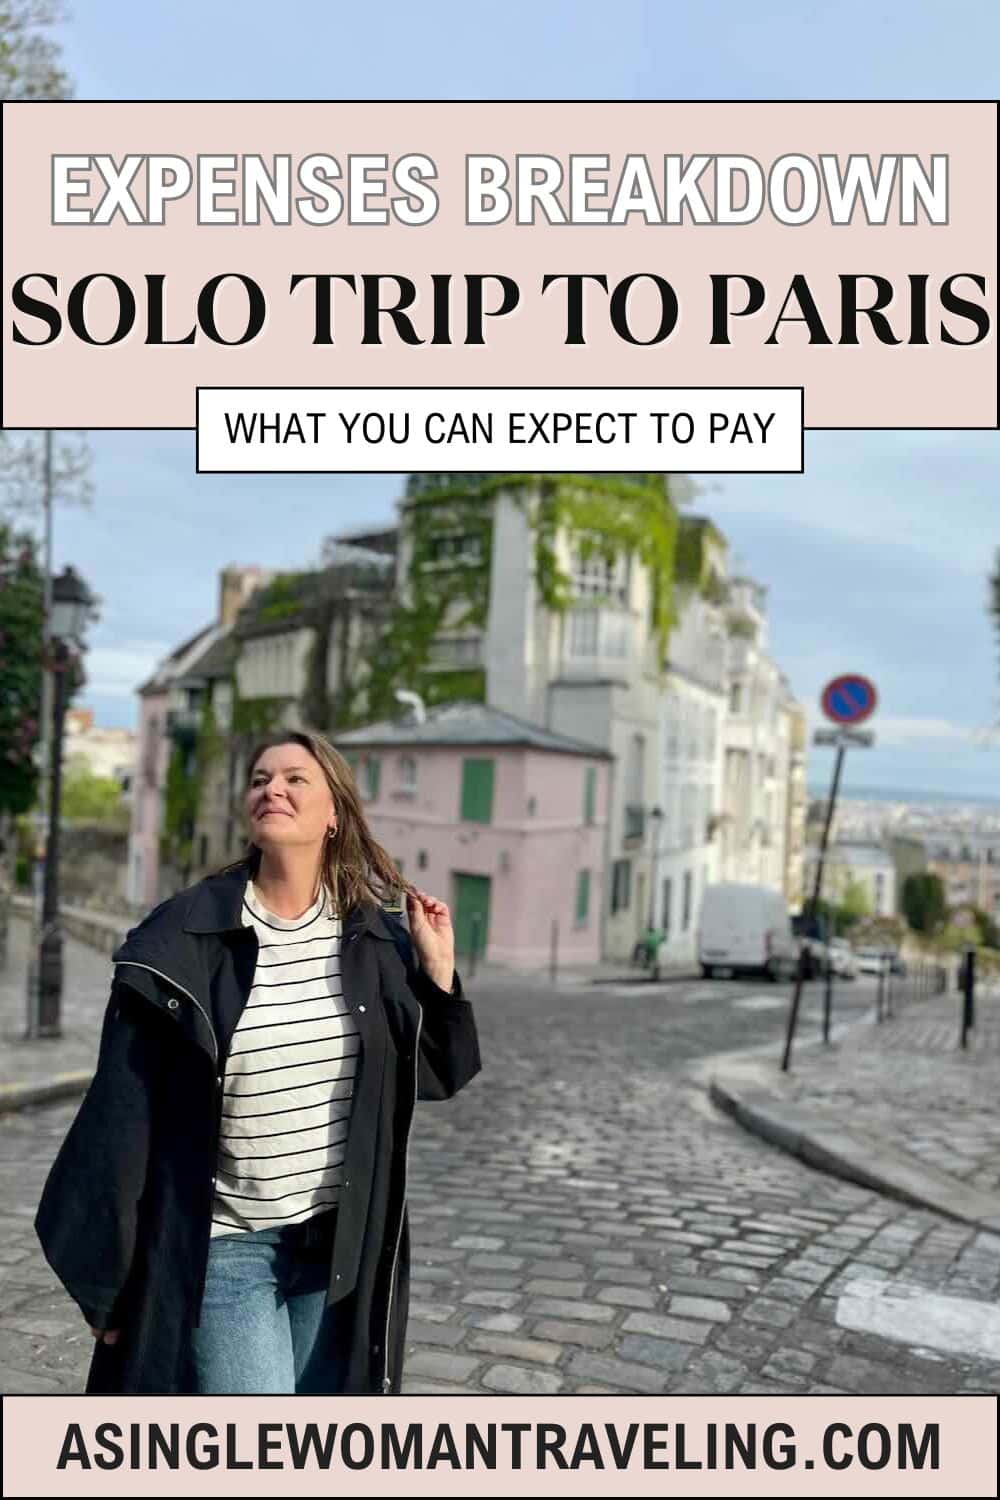 A woman in a black coat and striped shirt walks on a cobblestone street in Paris. Behind her is a pink building with green shutters and plants growing on the facade. The image includes a text overlay that says "Expenses Breakdown Solo Trip to Paris - What You Can Expect to Pay"